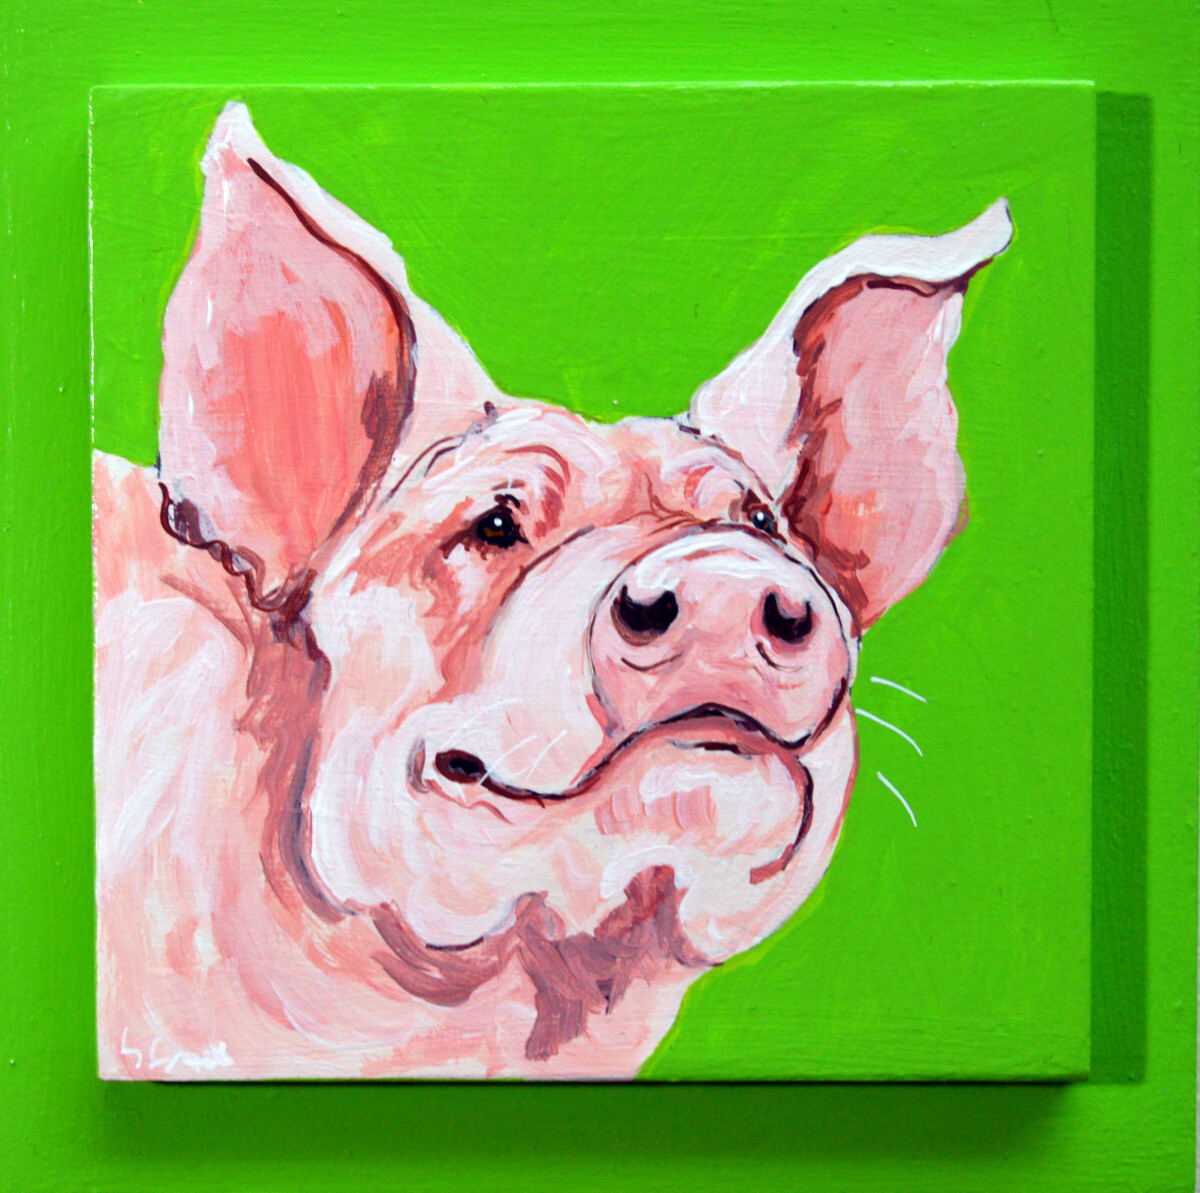 Elgin the Pig on Bright Green 